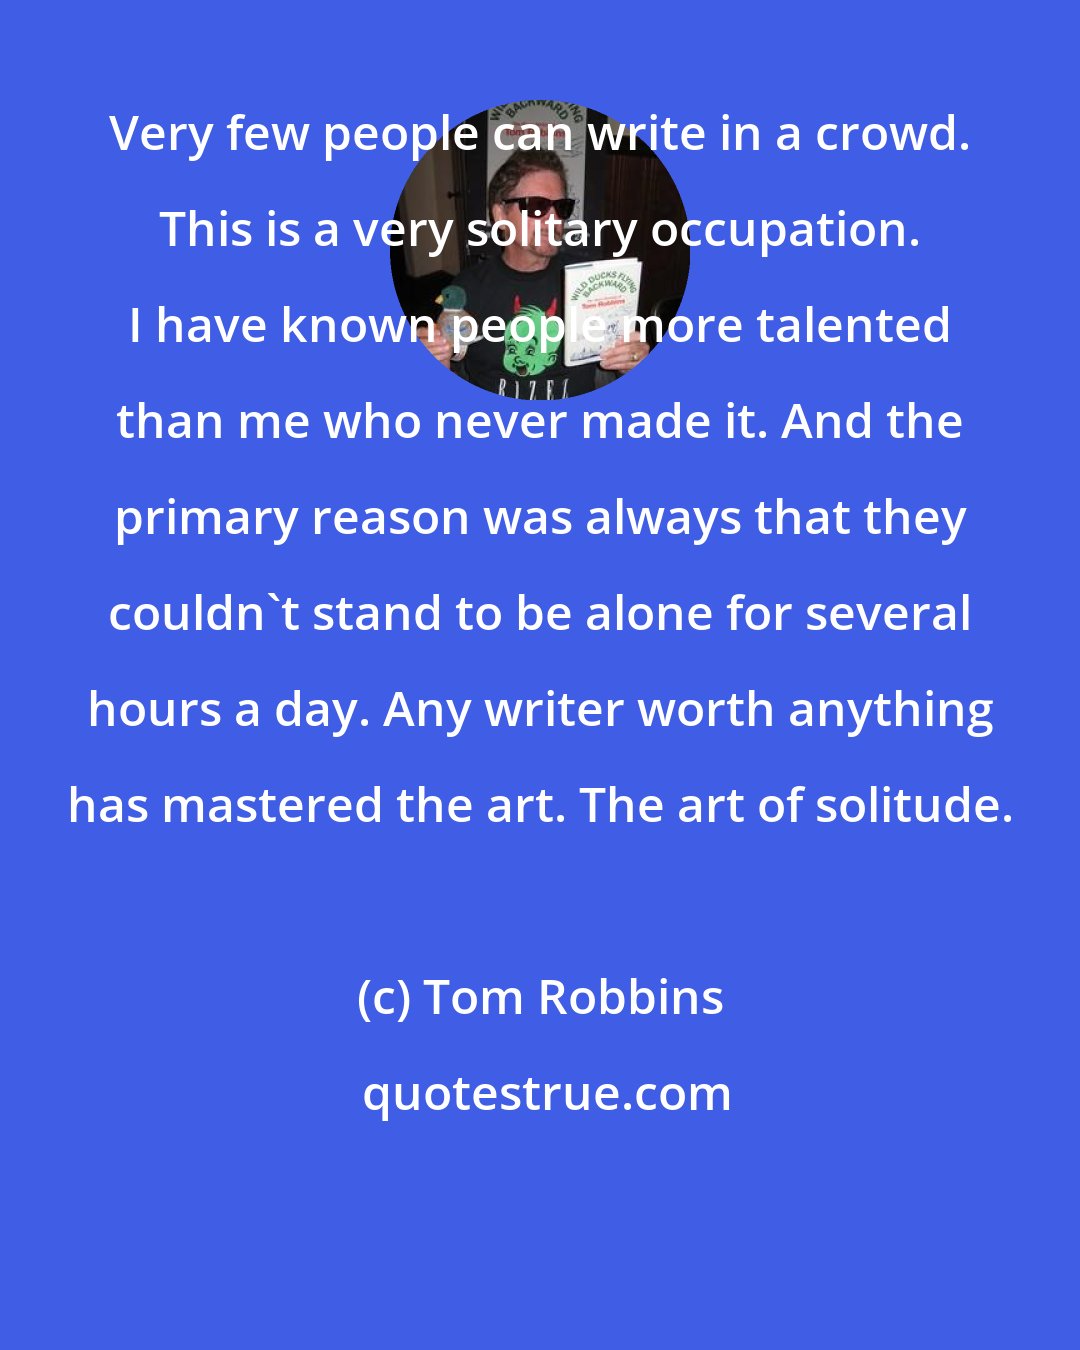 Tom Robbins: Very few people can write in a crowd. This is a very solitary occupation. I have known people more talented than me who never made it. And the primary reason was always that they couldn't stand to be alone for several hours a day. Any writer worth anything has mastered the art. The art of solitude.